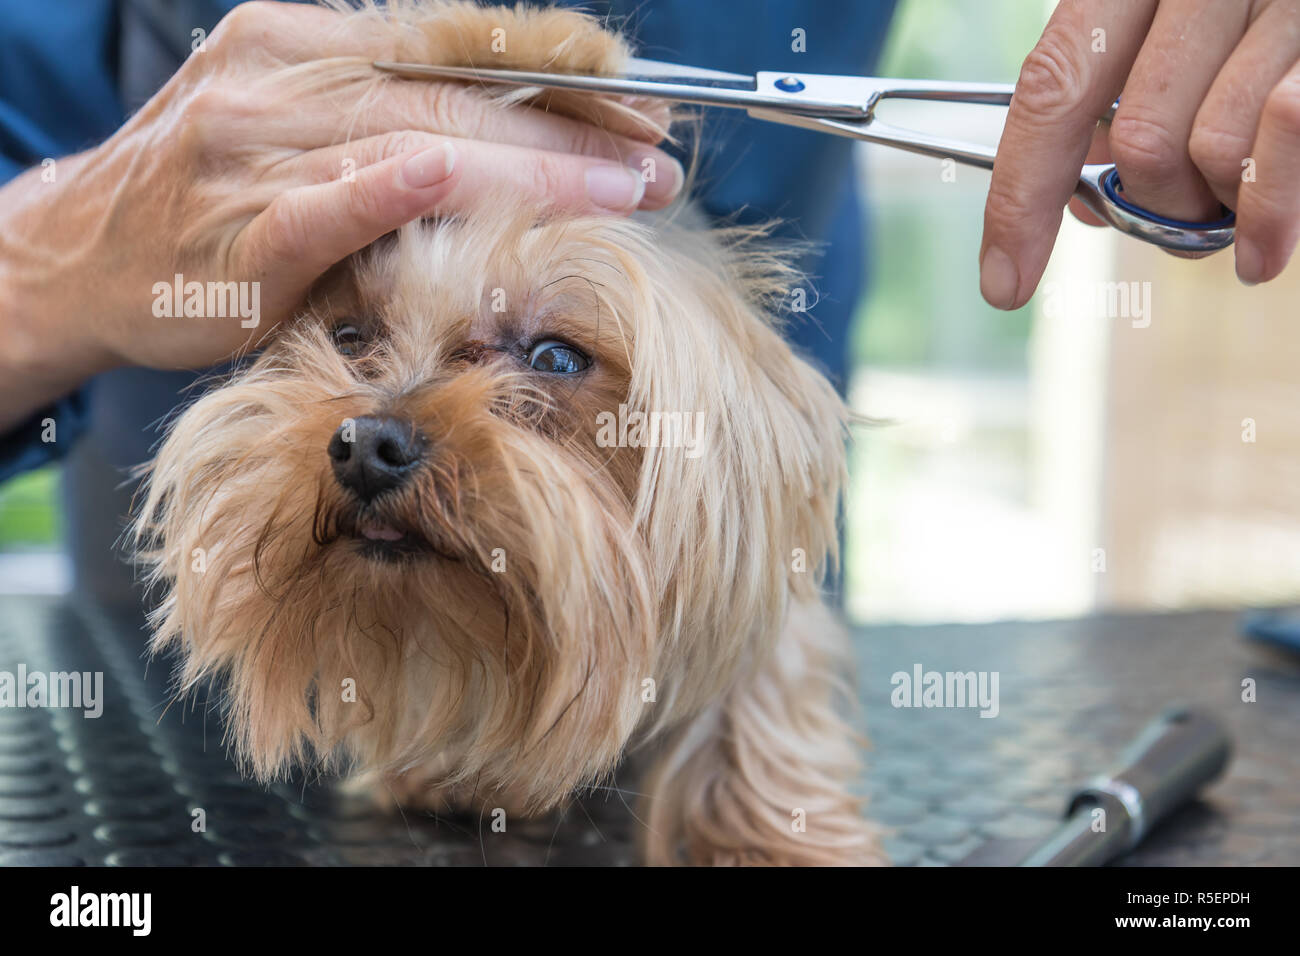 Grooming the head of Yorkshire terrier closeup Stock Photo